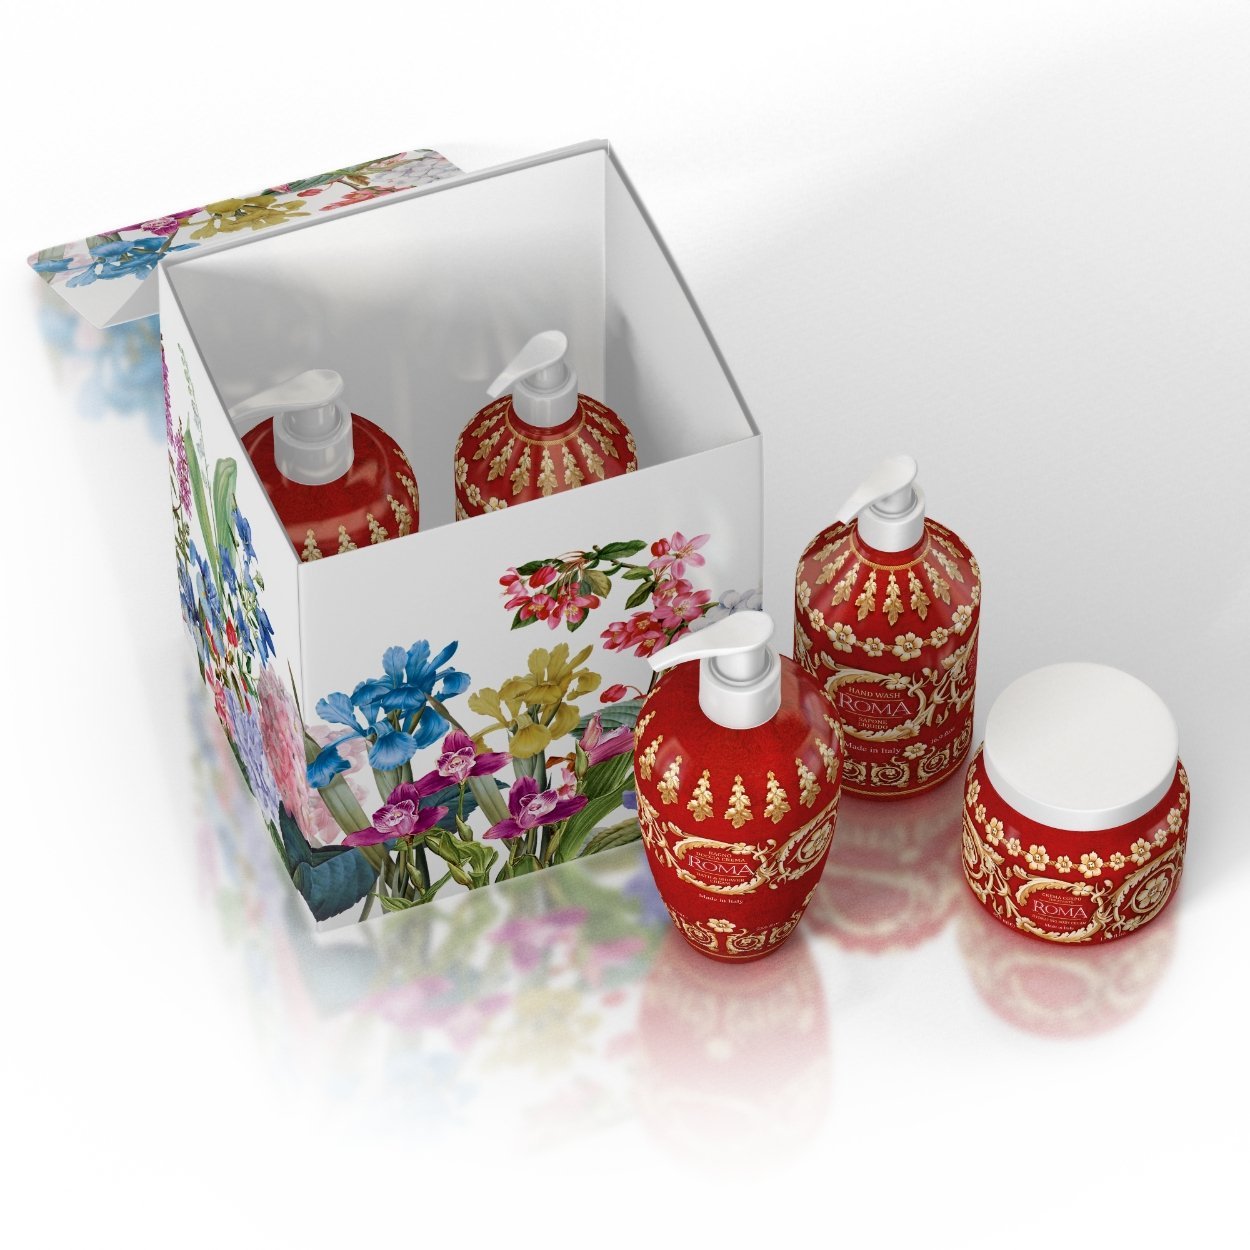 Gift Set - Roma Body Art Edition by Rudy Profumi - |VESIMI Design| Luxury and Rustic bathrooms online